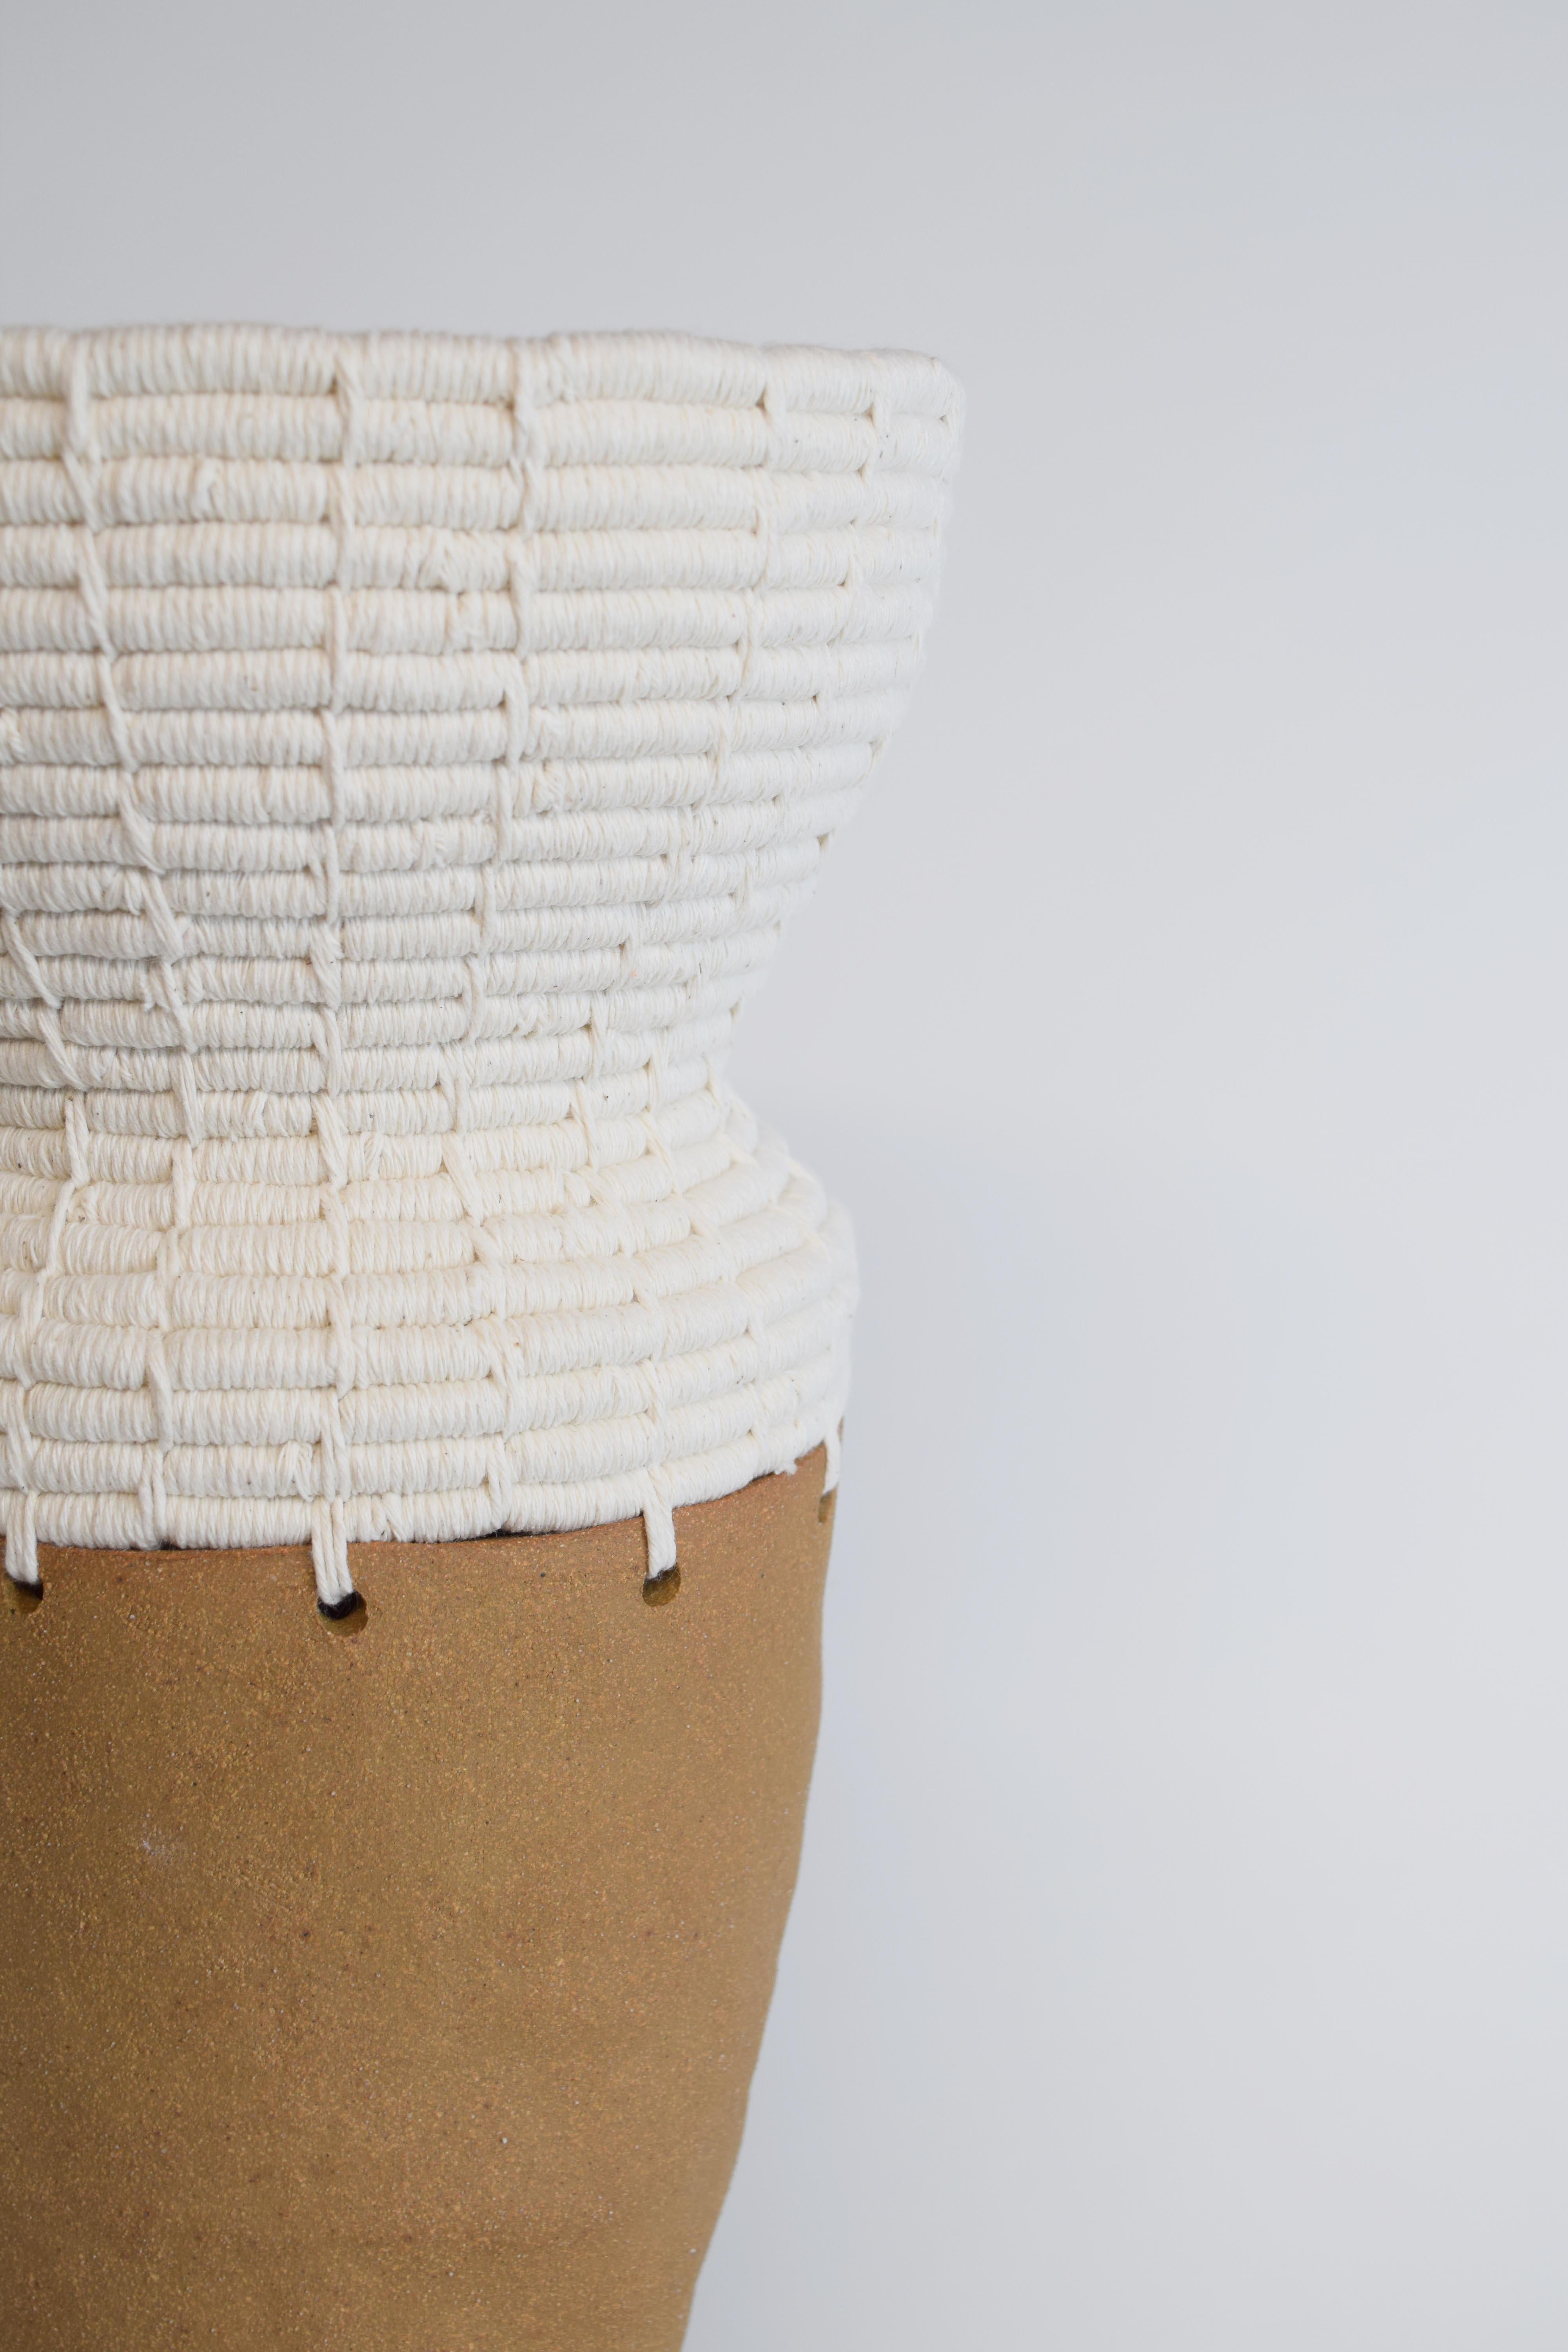 American One of a Kind Ceramic and Woven Cotton Vessel #739, Natural Clay & White Details